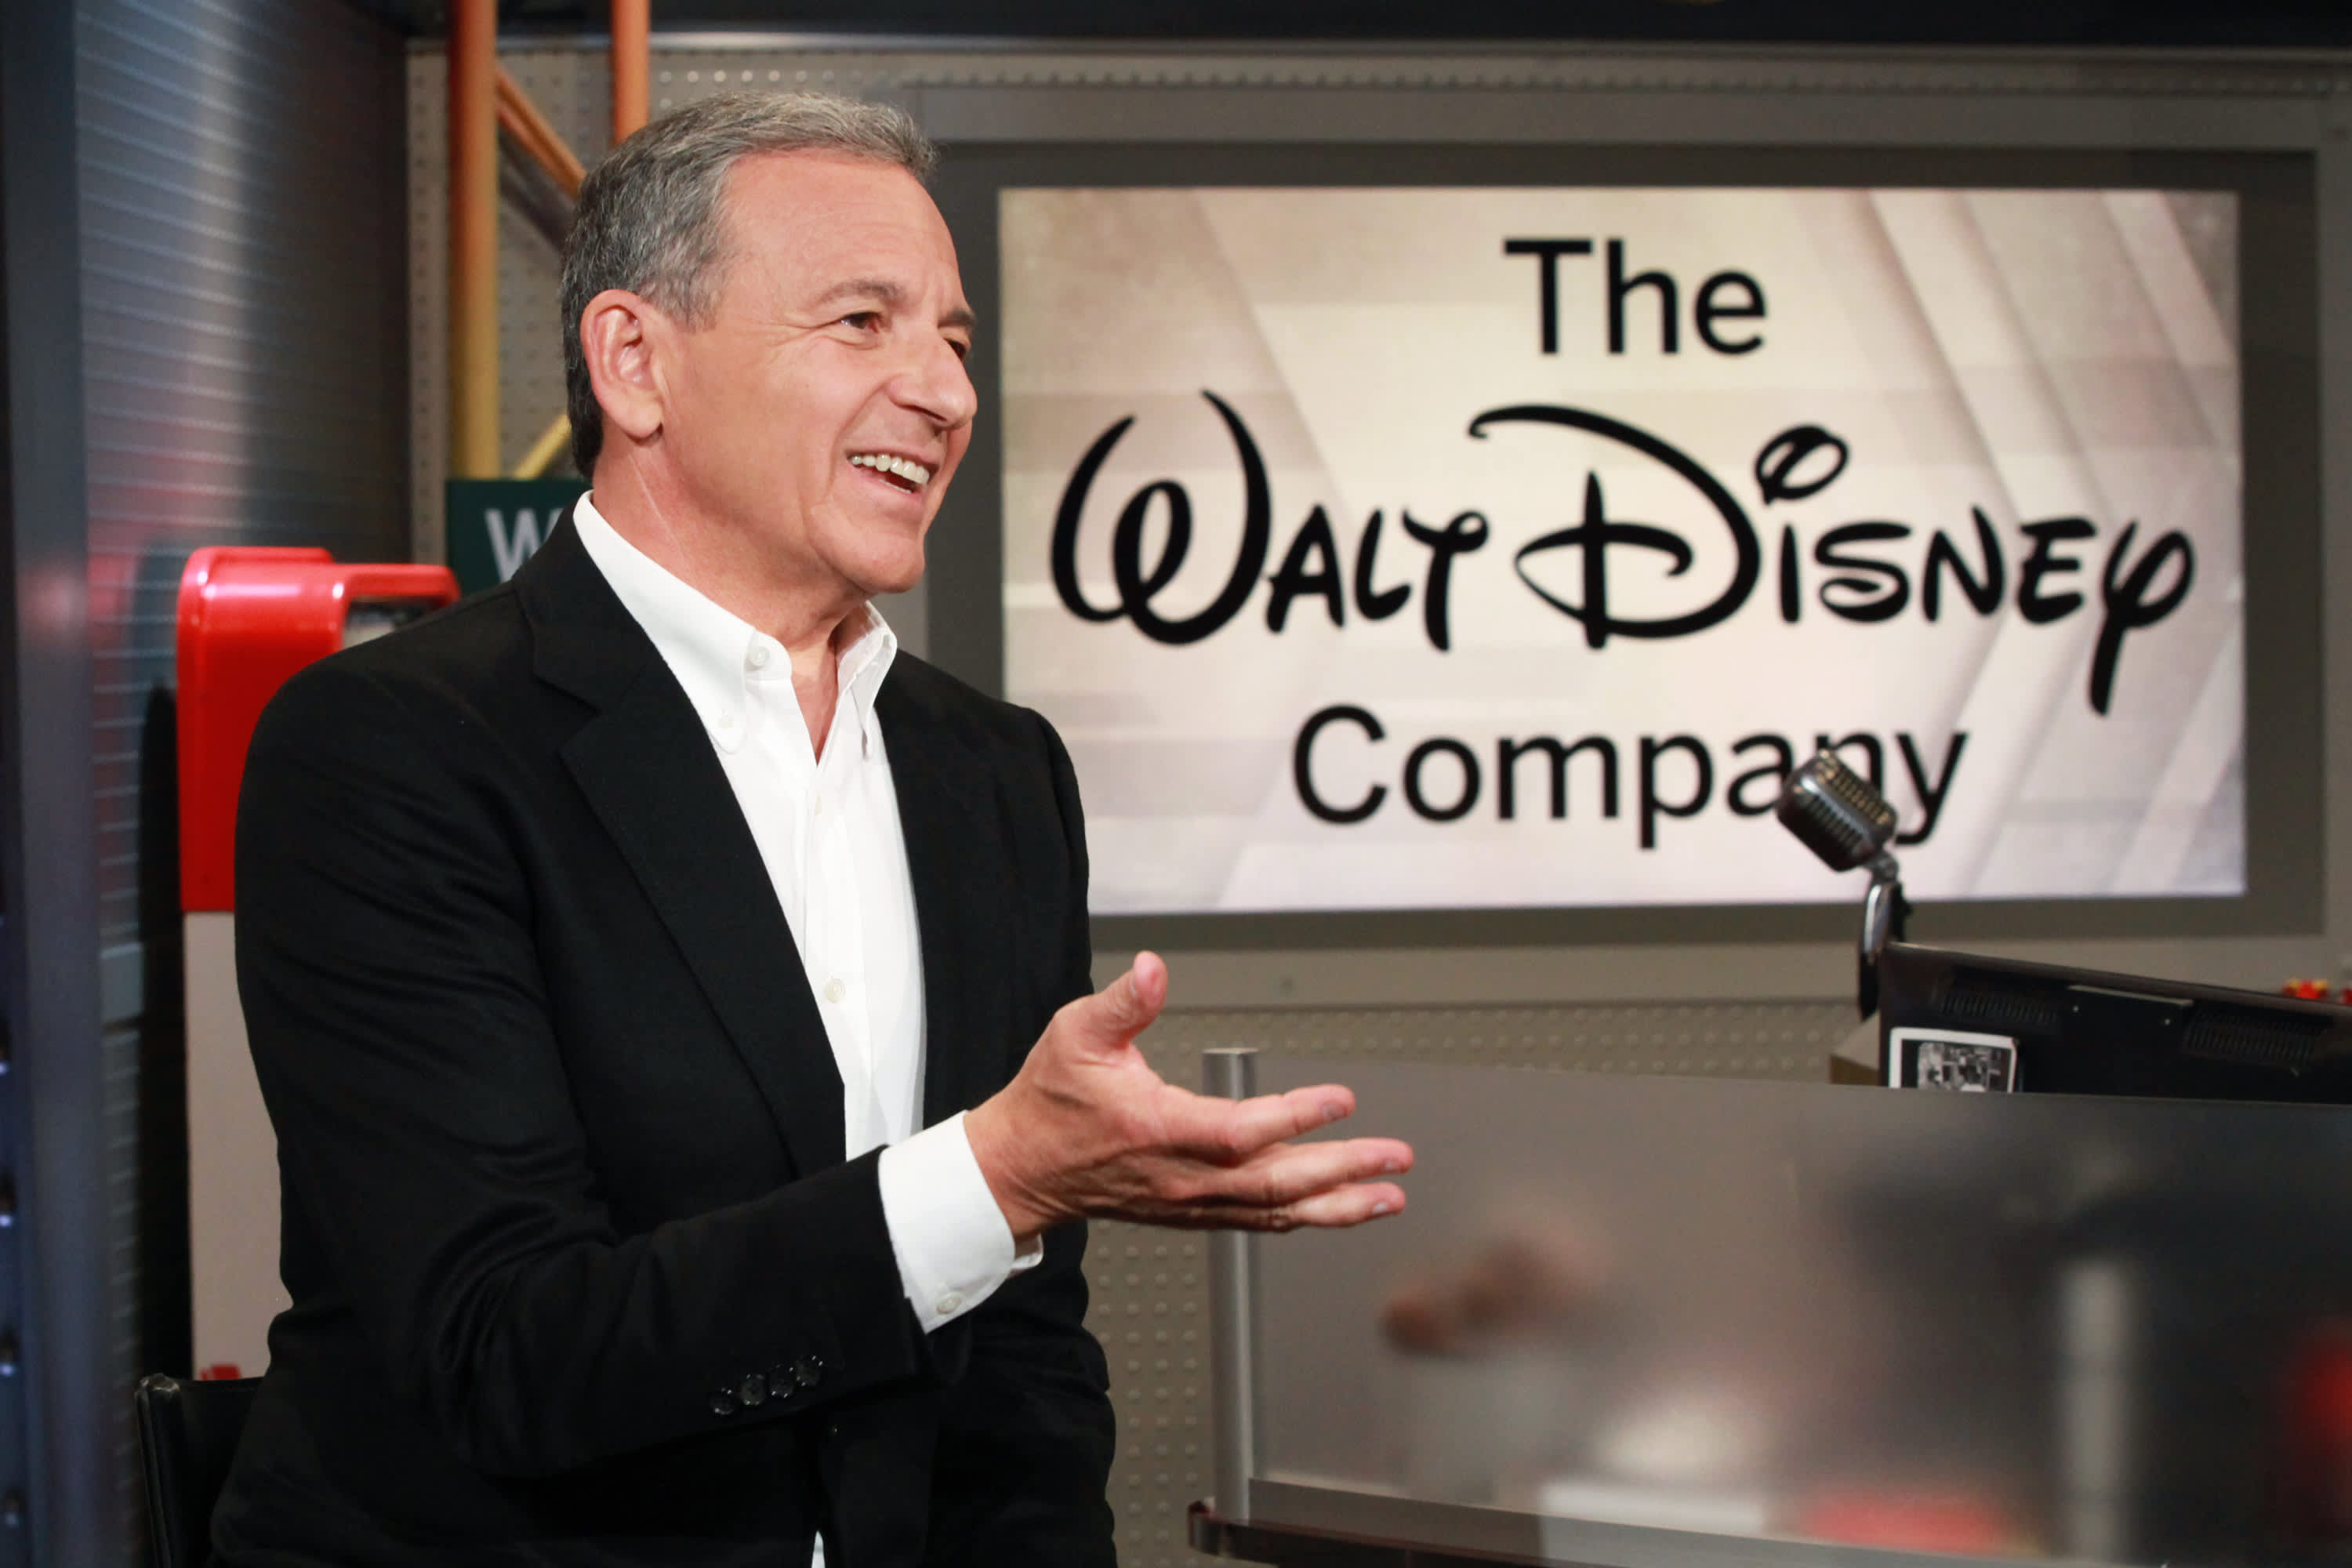 Bob Iger is back. He's the steady hand that Disney needs as CEO to get it back on track